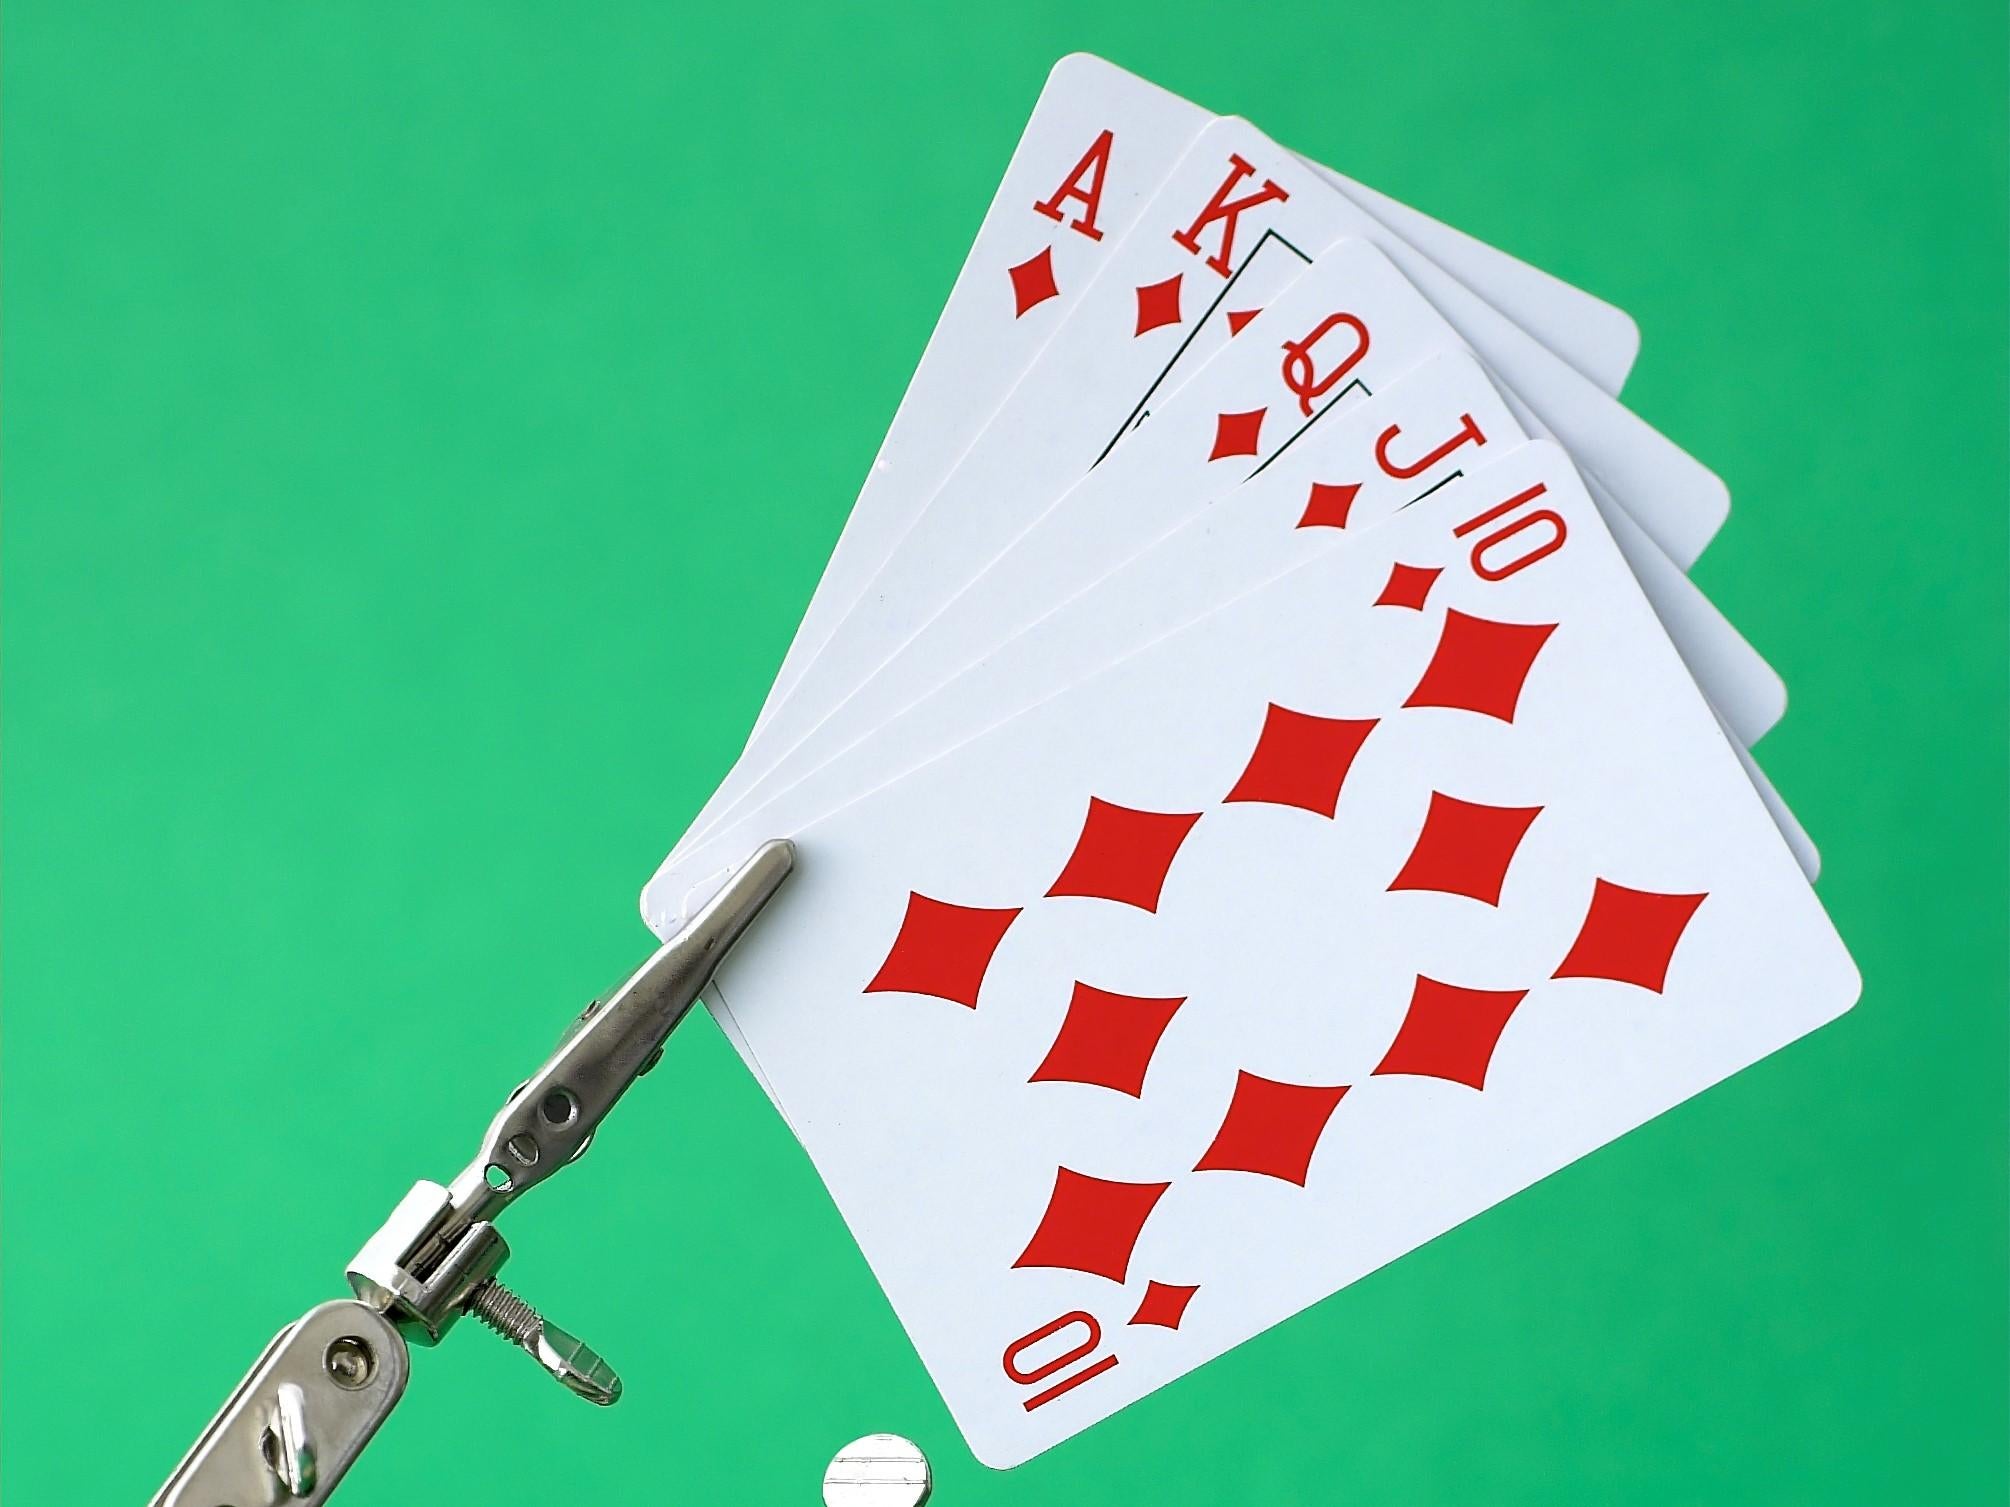 Poker has been a notoriously difficult game for artificial intelligence to master